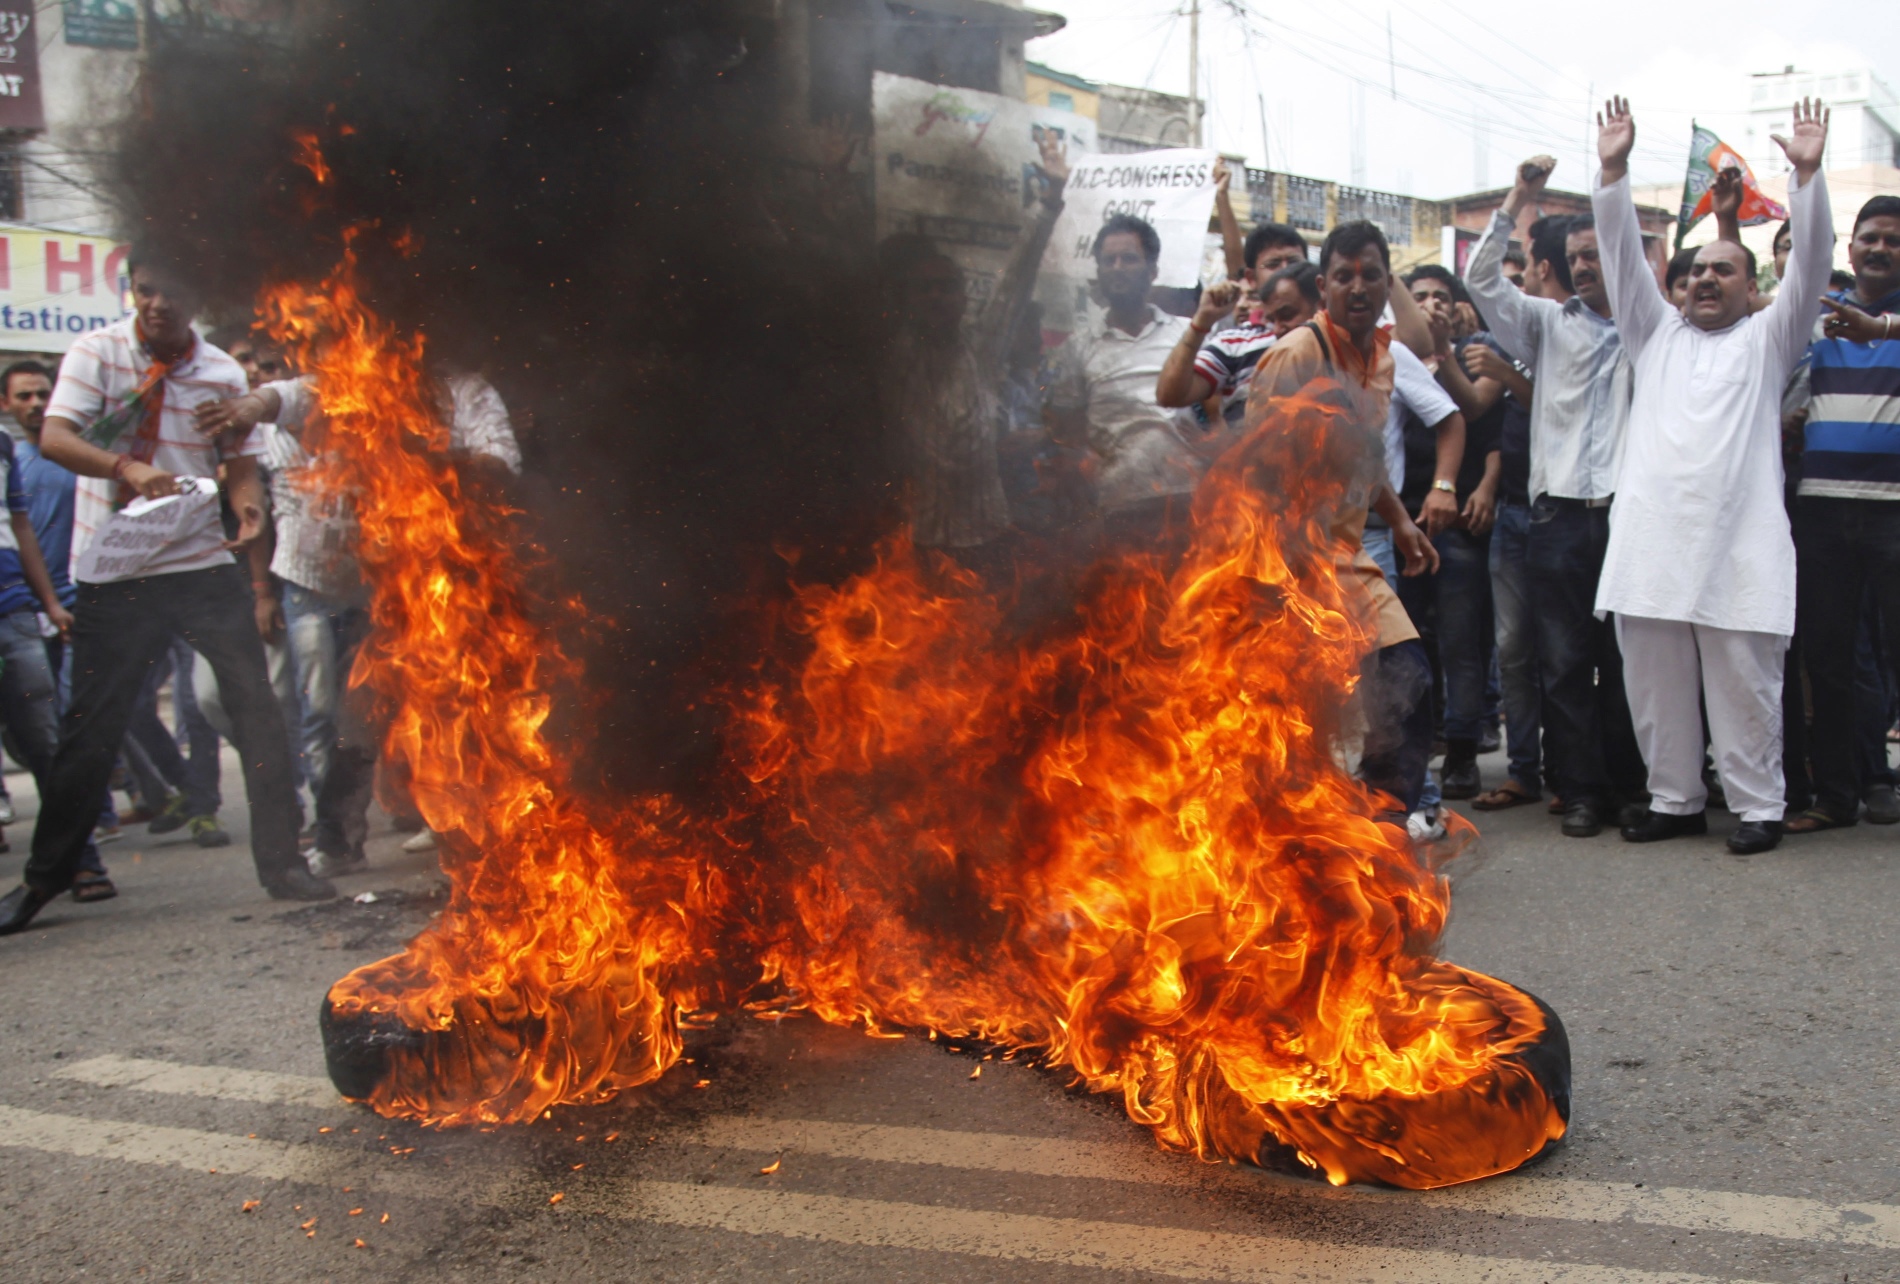 Indian Hindu protesters burn tires and shout slogans against the state government after rival communities clashed in Kishtwar. Indian forces enforce curfew in town in Kashmir. Photo: AP